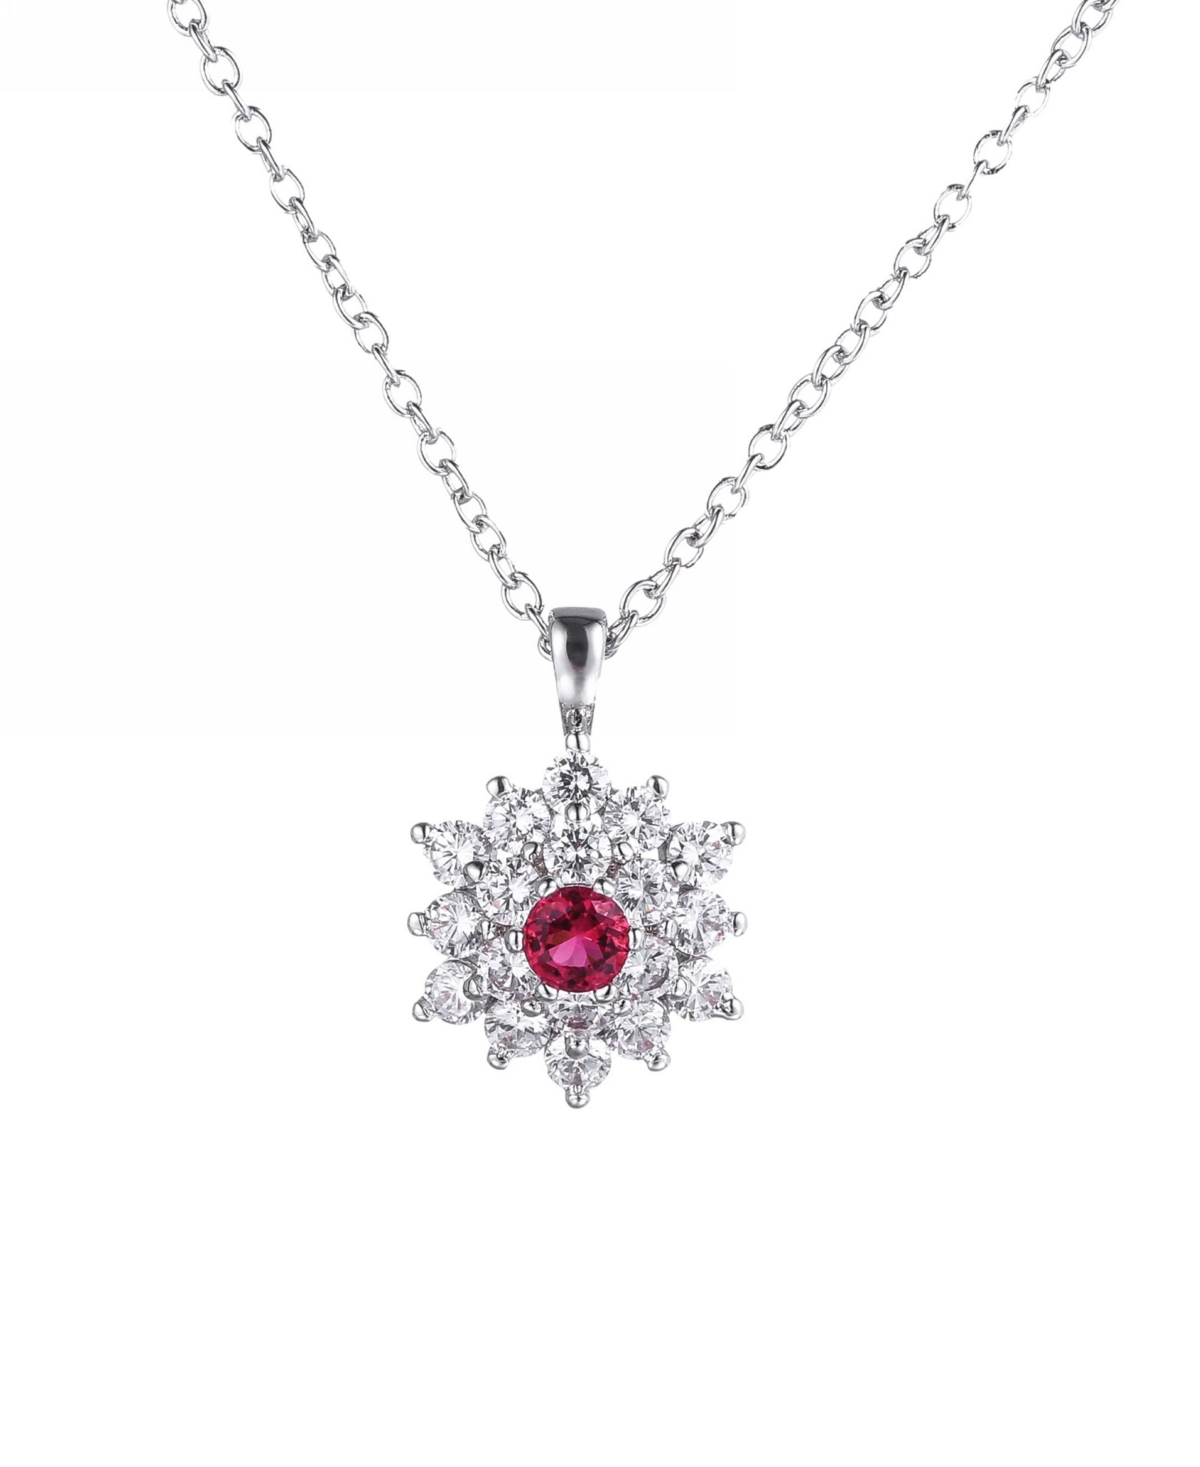 A & M Silver-Tone Ruby Accent Flower Pendant Necklace